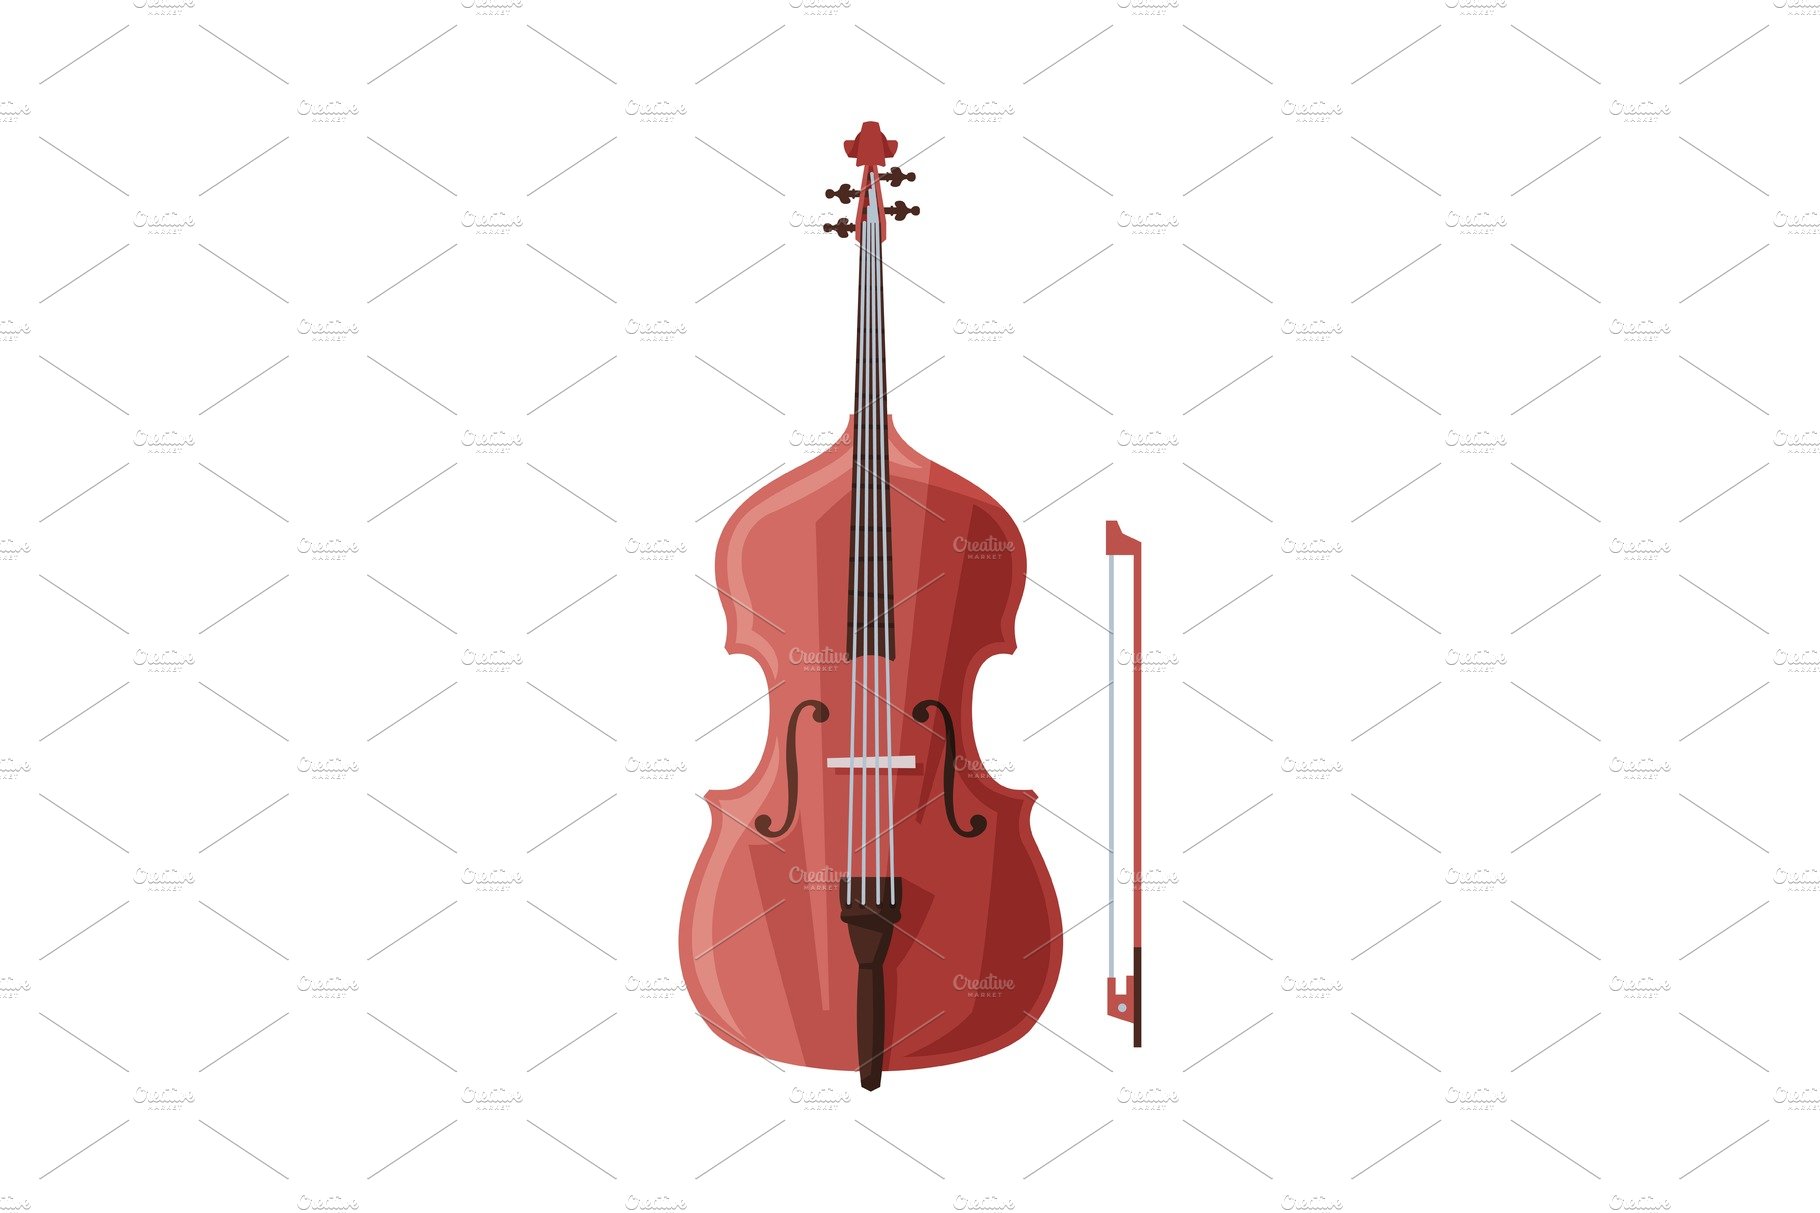 Cello and Bow Classical String cover image.